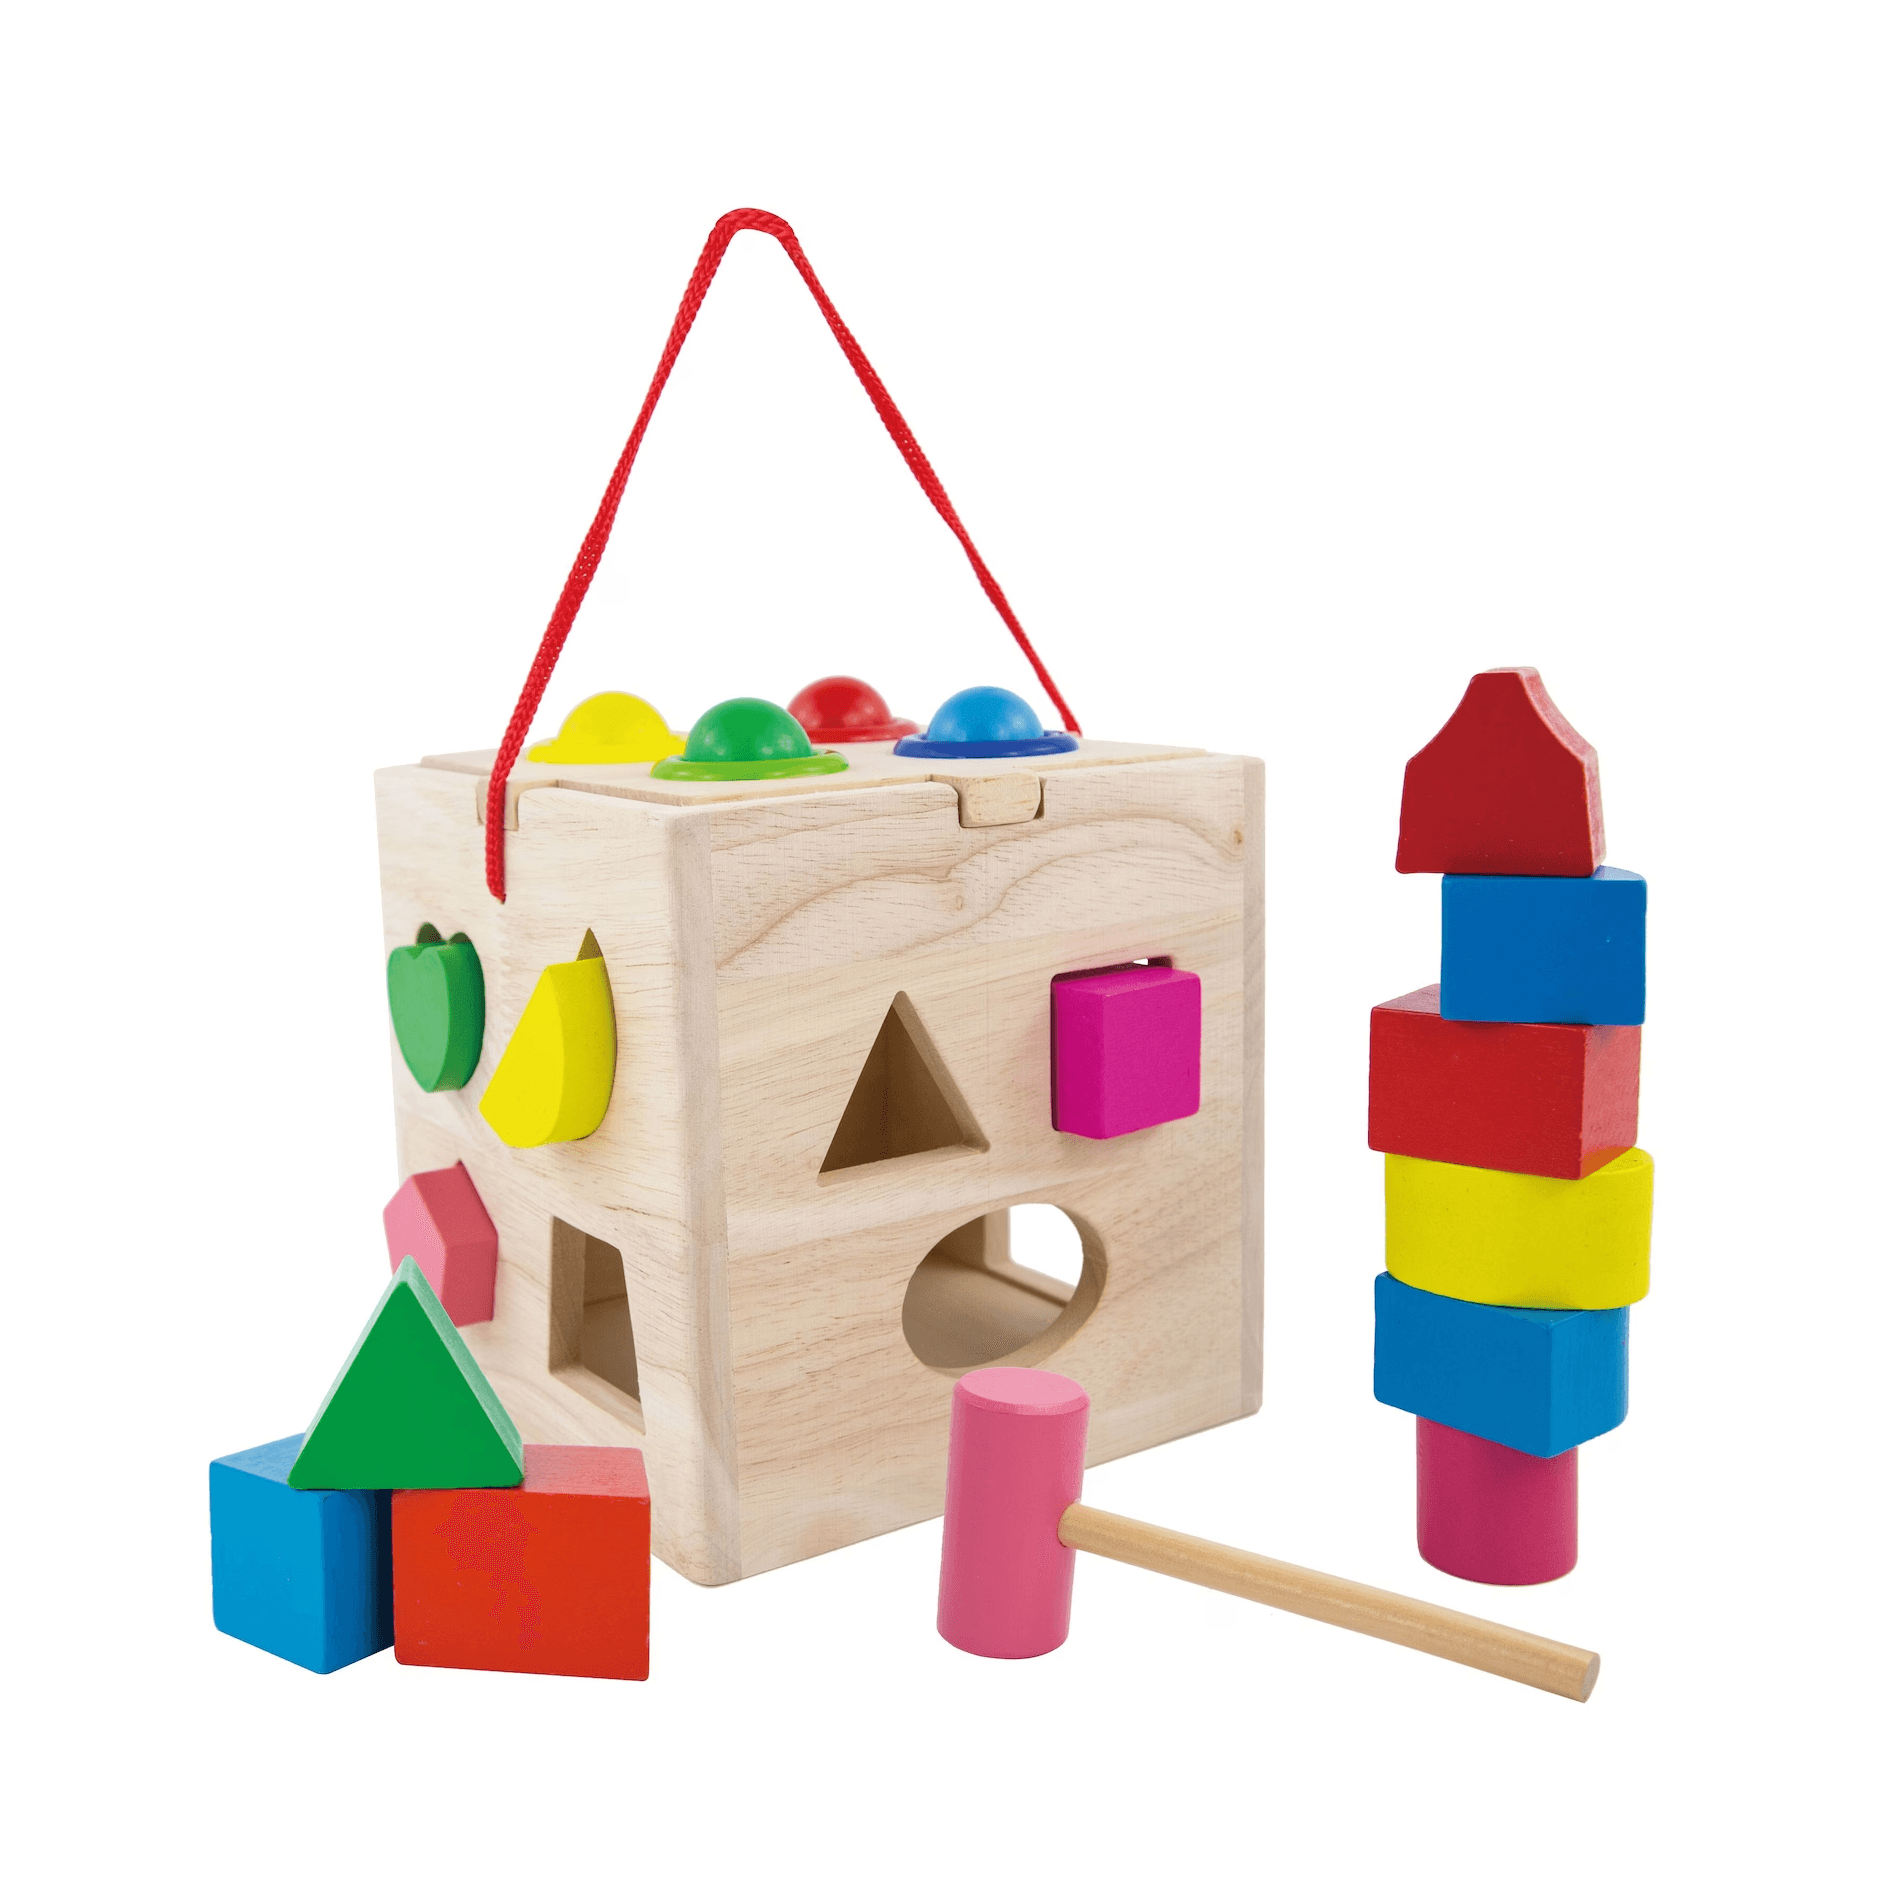 Montessori Evmark Toys Wooden Activity Cube Shapes and Blocks